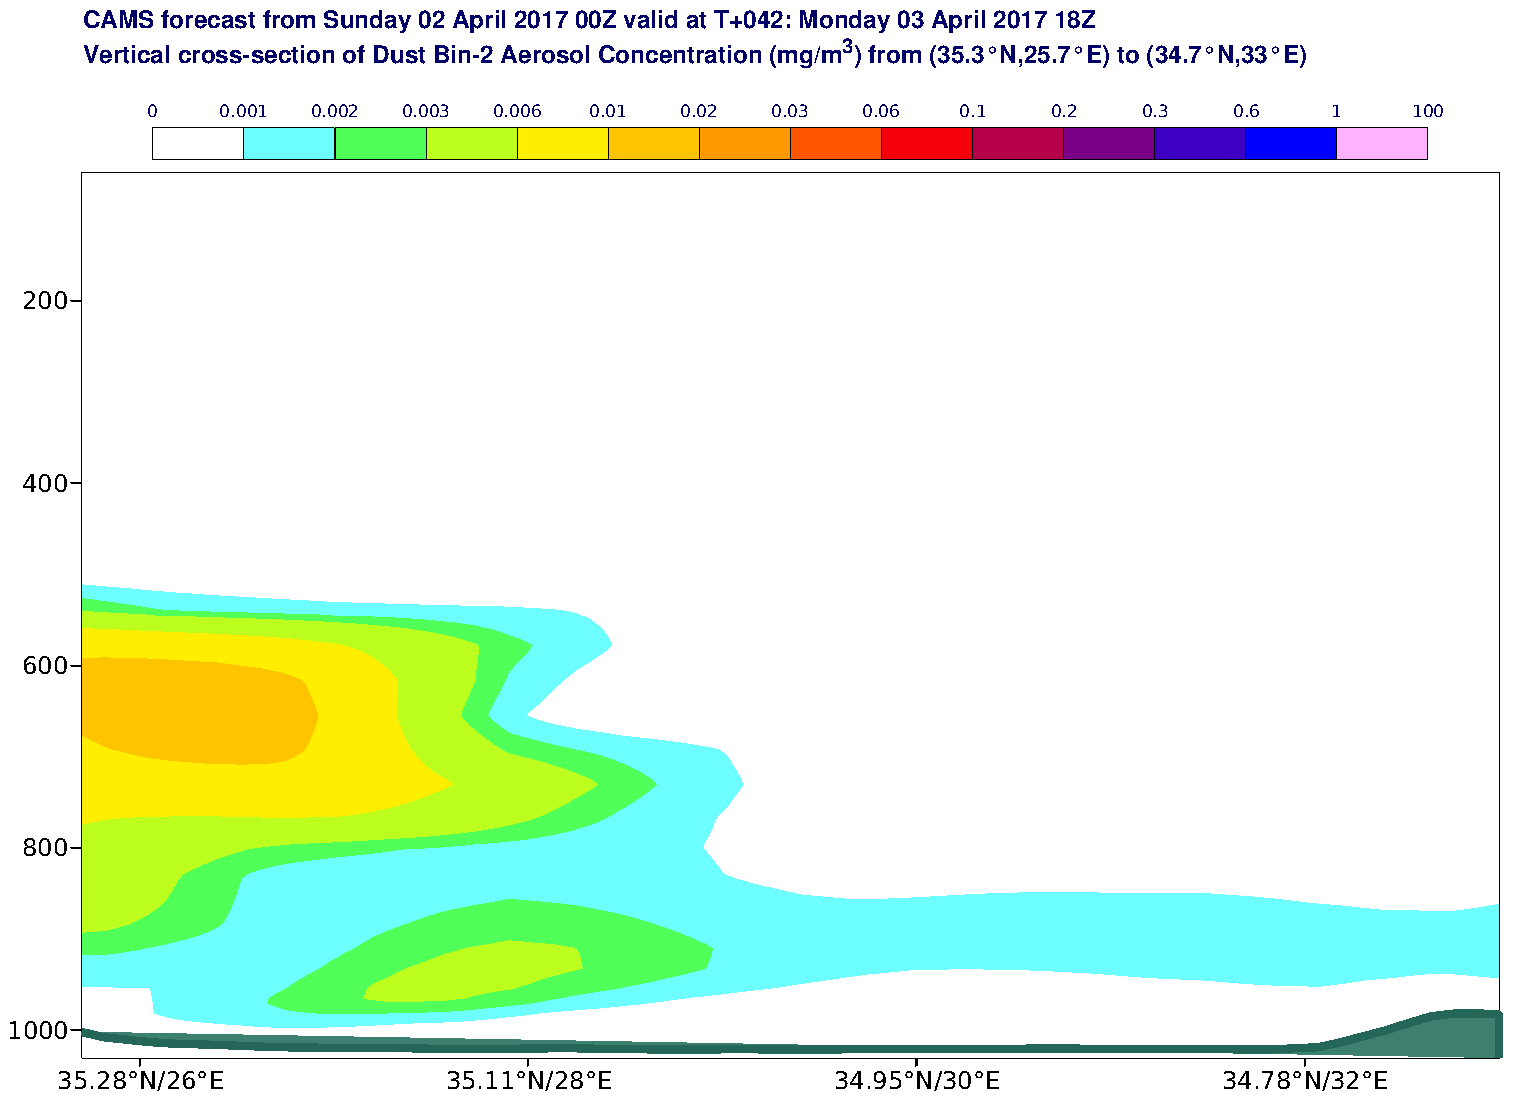 Vertical cross-section of Dust Bin-2 Aerosol Concentration (mg/m3) valid at T42 - 2017-04-03 18:00